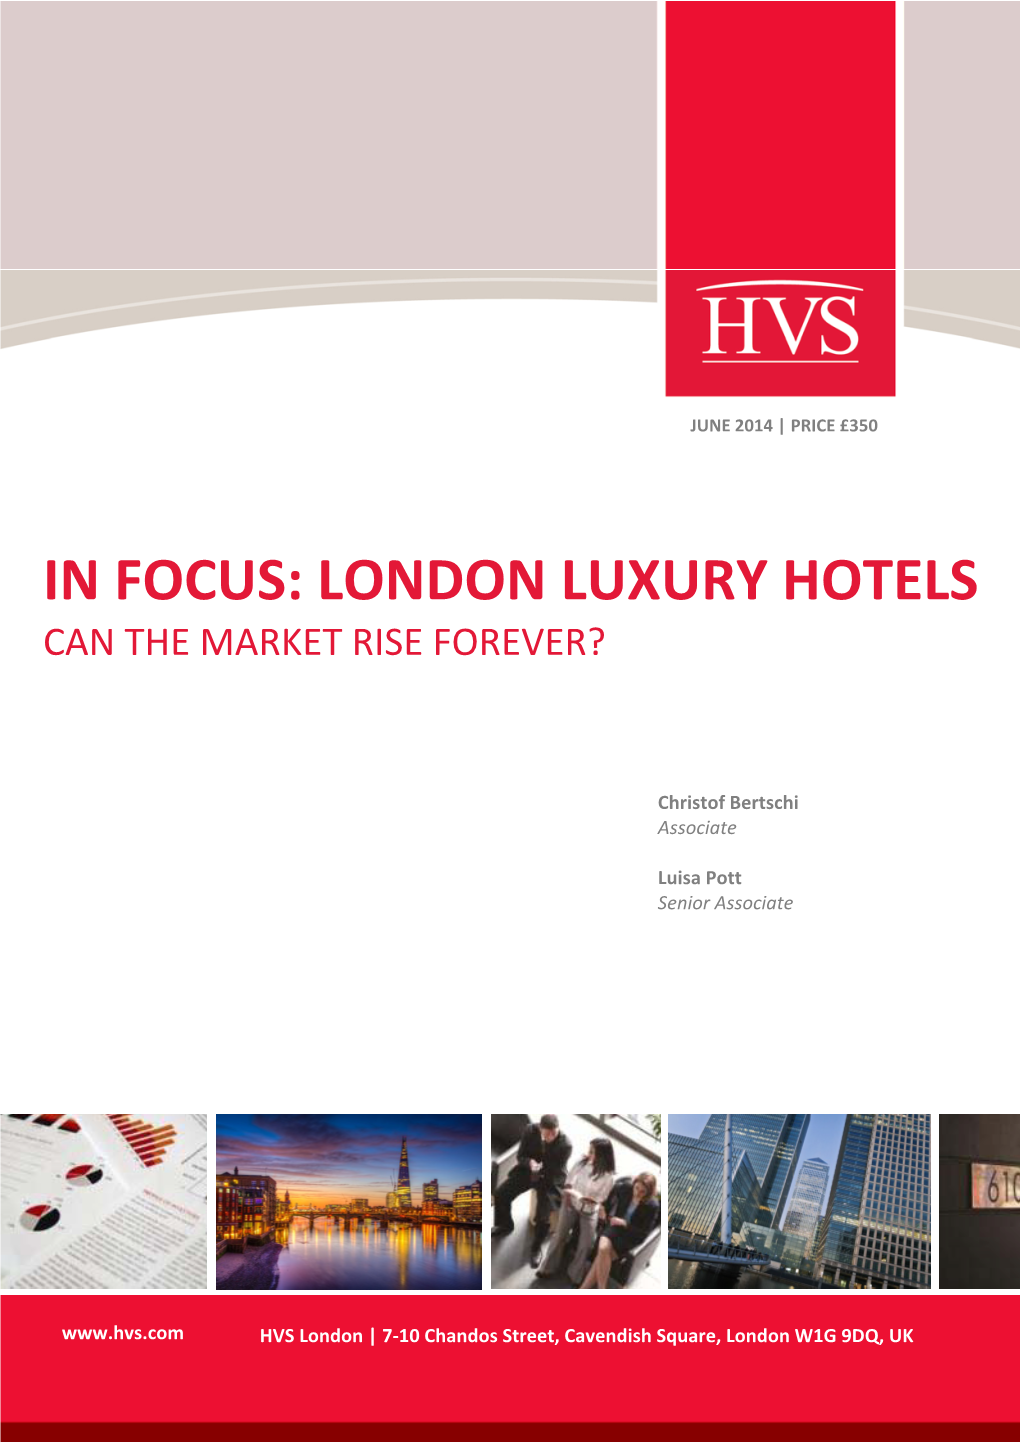 London Luxury Hotels Can the Market Rise Forever?